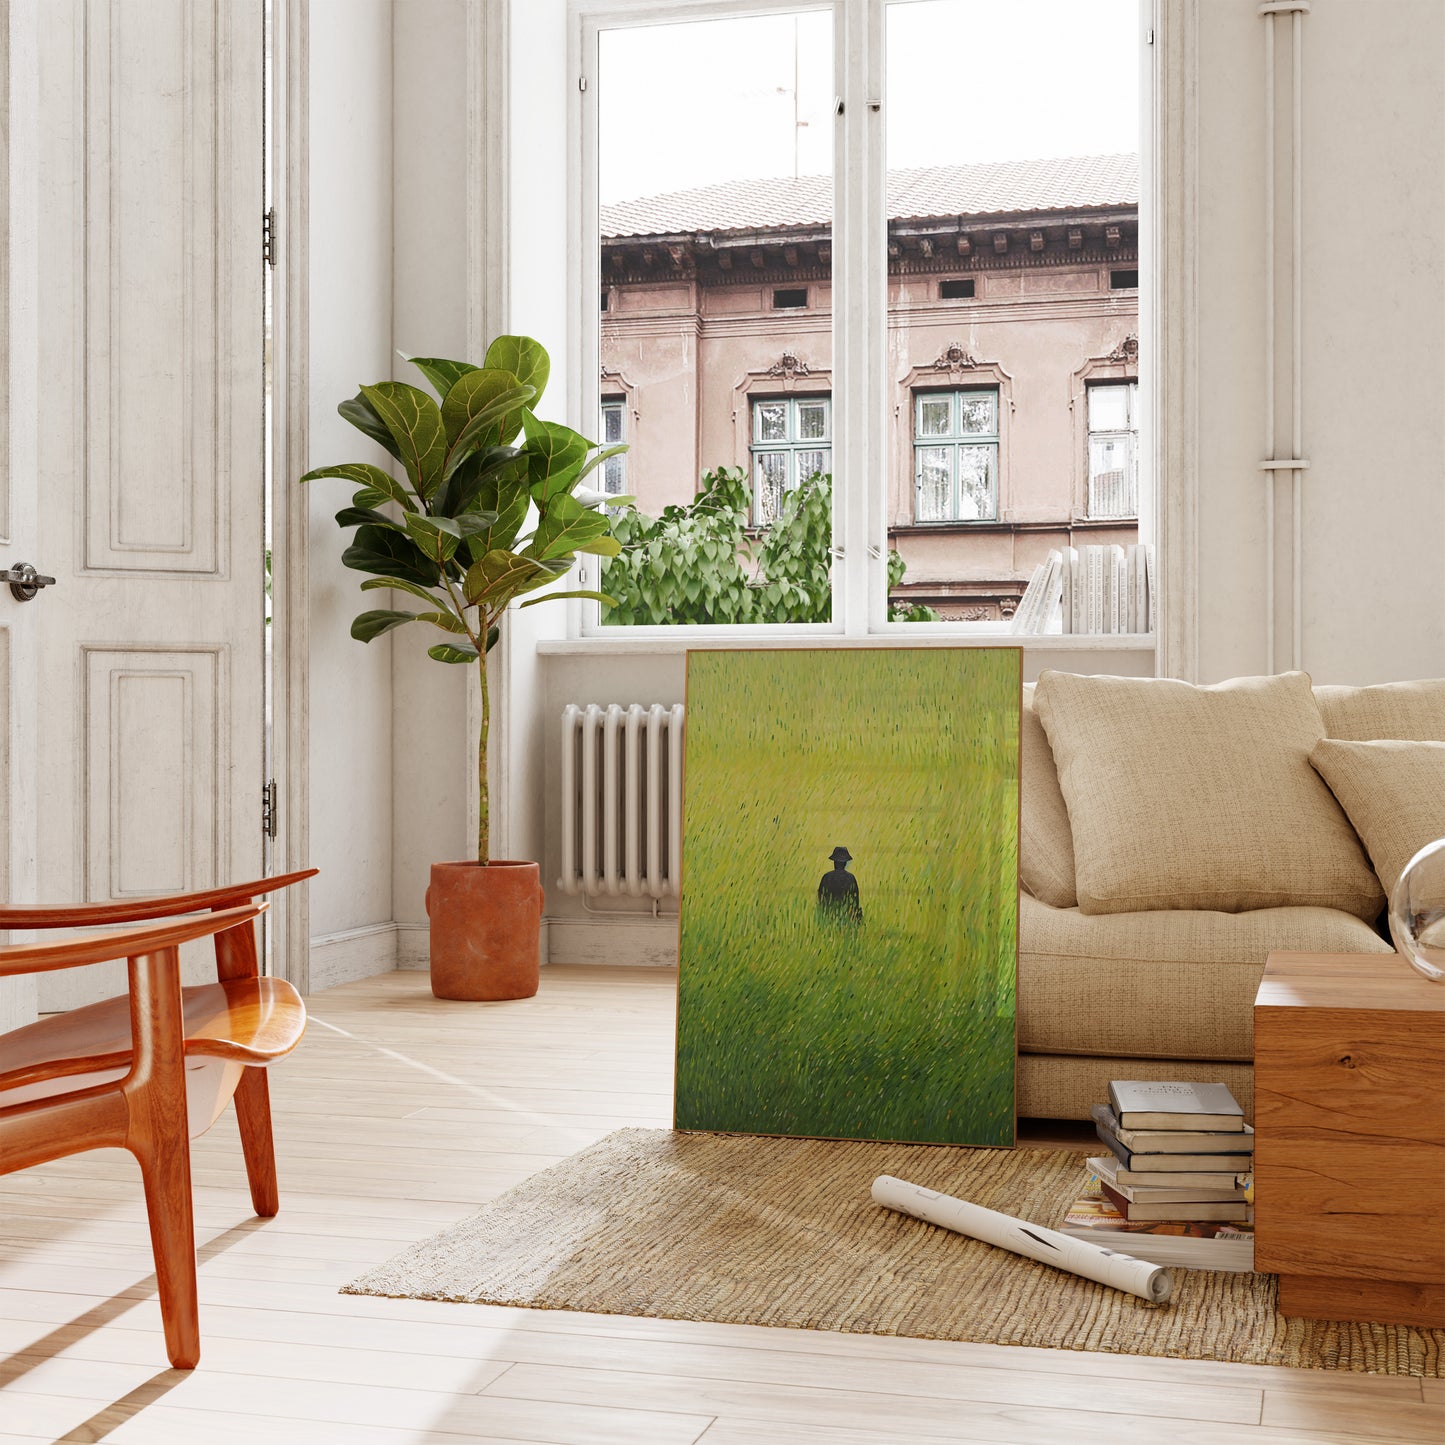 A cozy living room with a large green painting leaning against the wall near a sofa and plants.